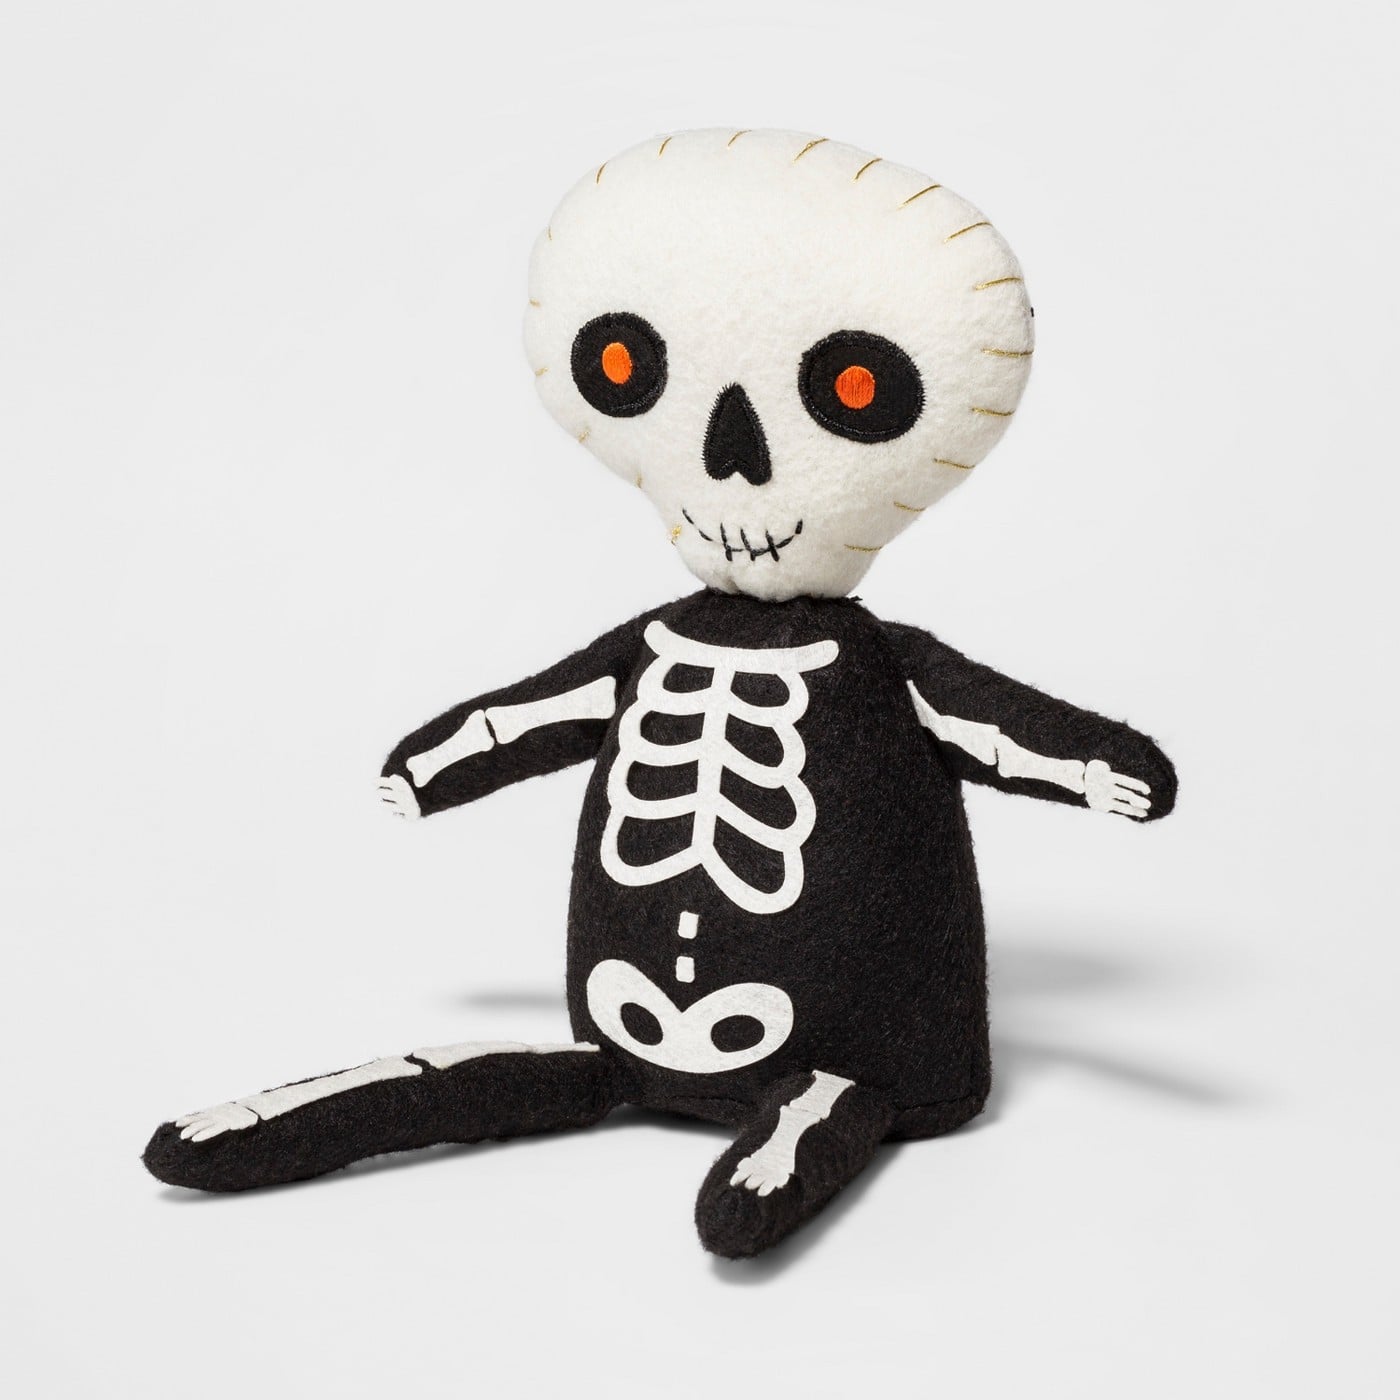 Fabric Skeleton These Cheap Halloween Stuffed Animals At Target Can Be Your Kids Spooky Friends All Year Long Popsugar Family Photo 12